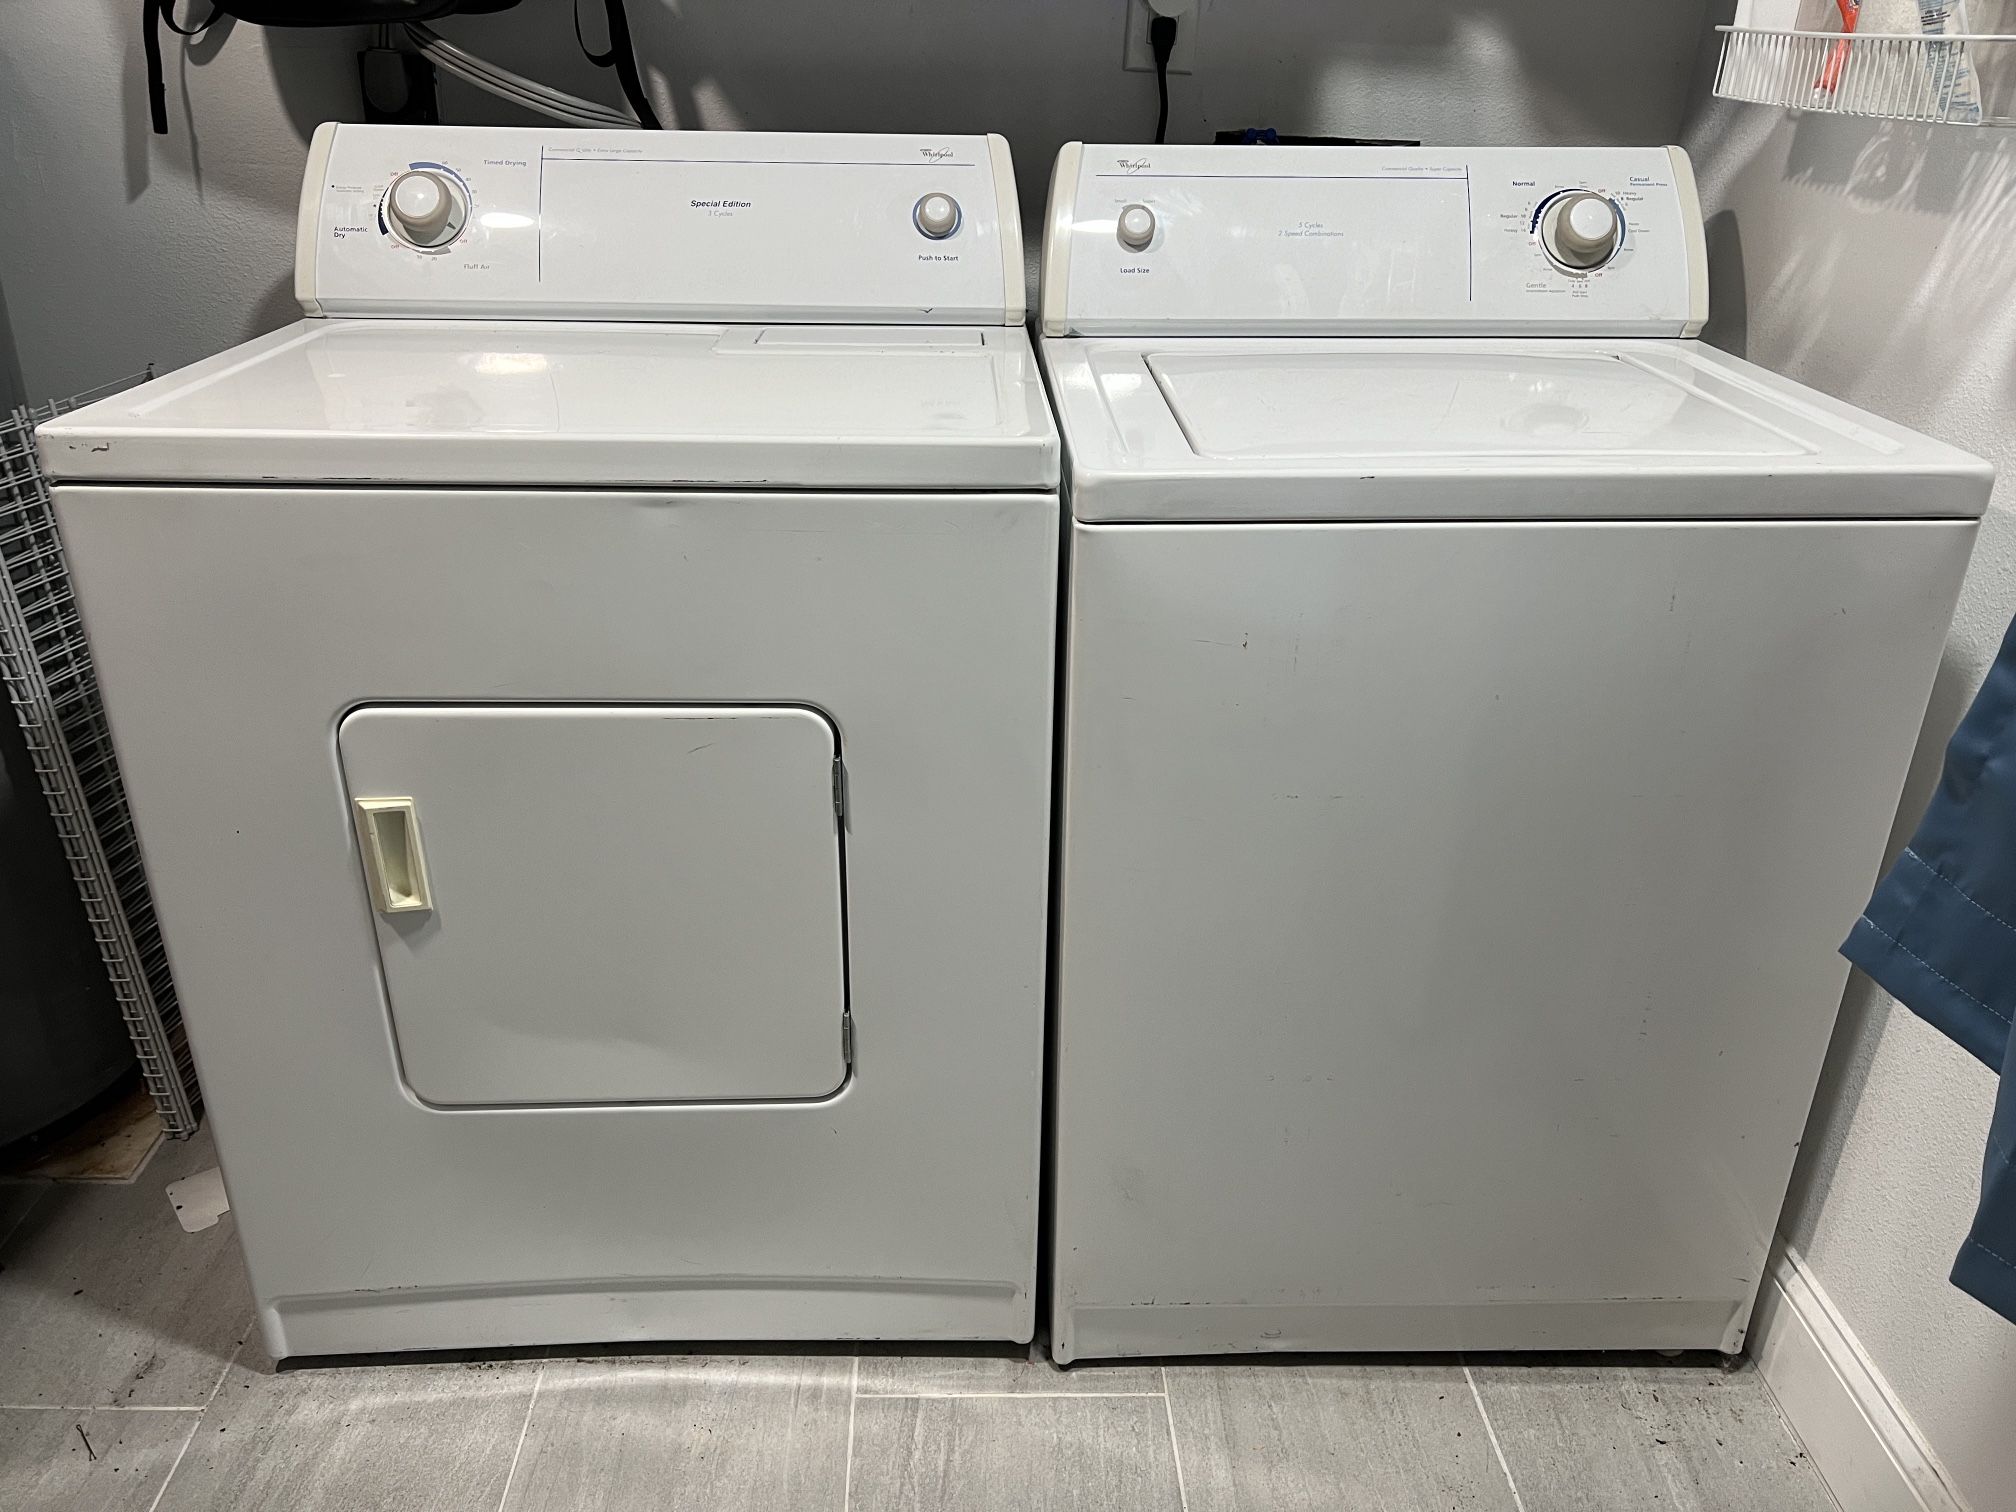 Matching Whirlpool Washer And Dryer Set